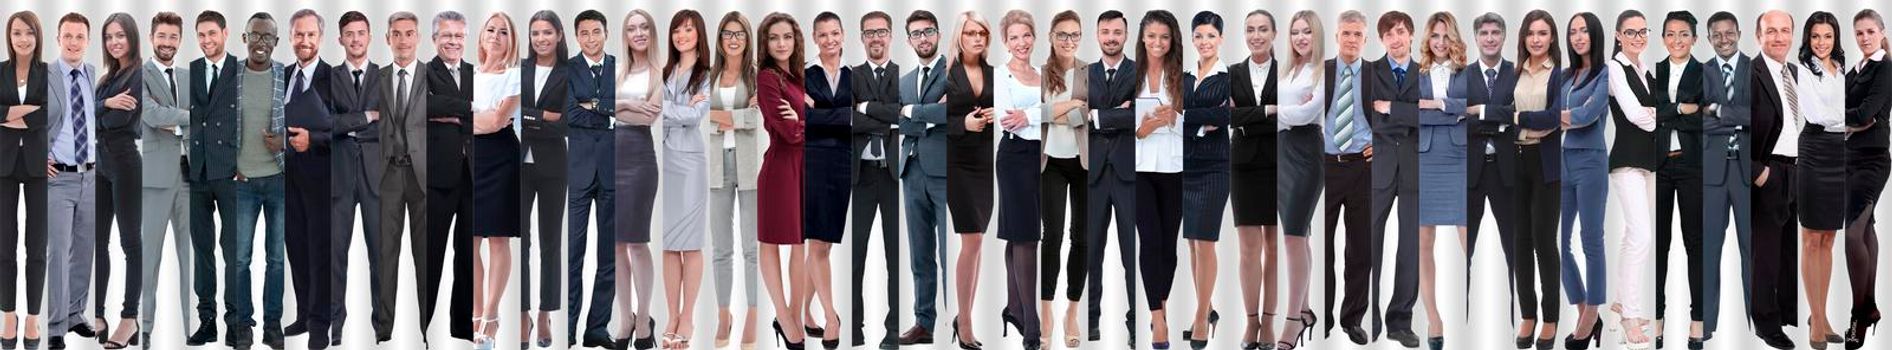 panoramic collage of a group of successful young business people.